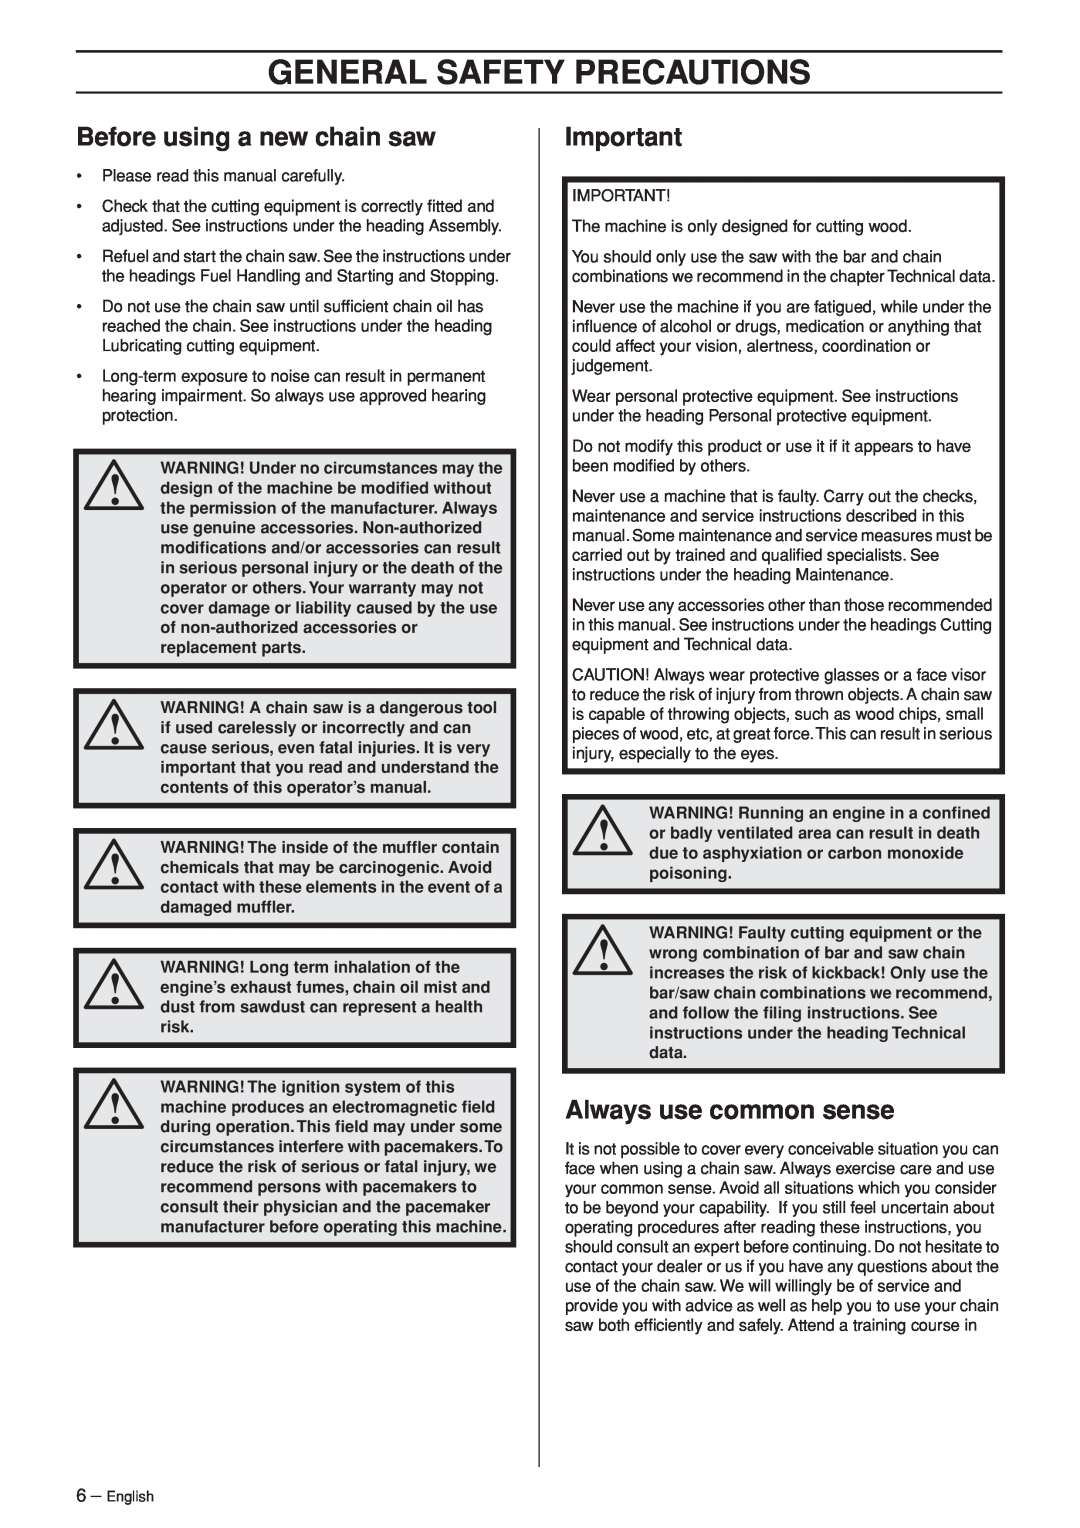 Jonsered CS 2255 manual General Safety Precautions, Before using a new chain saw, Always use common sense 